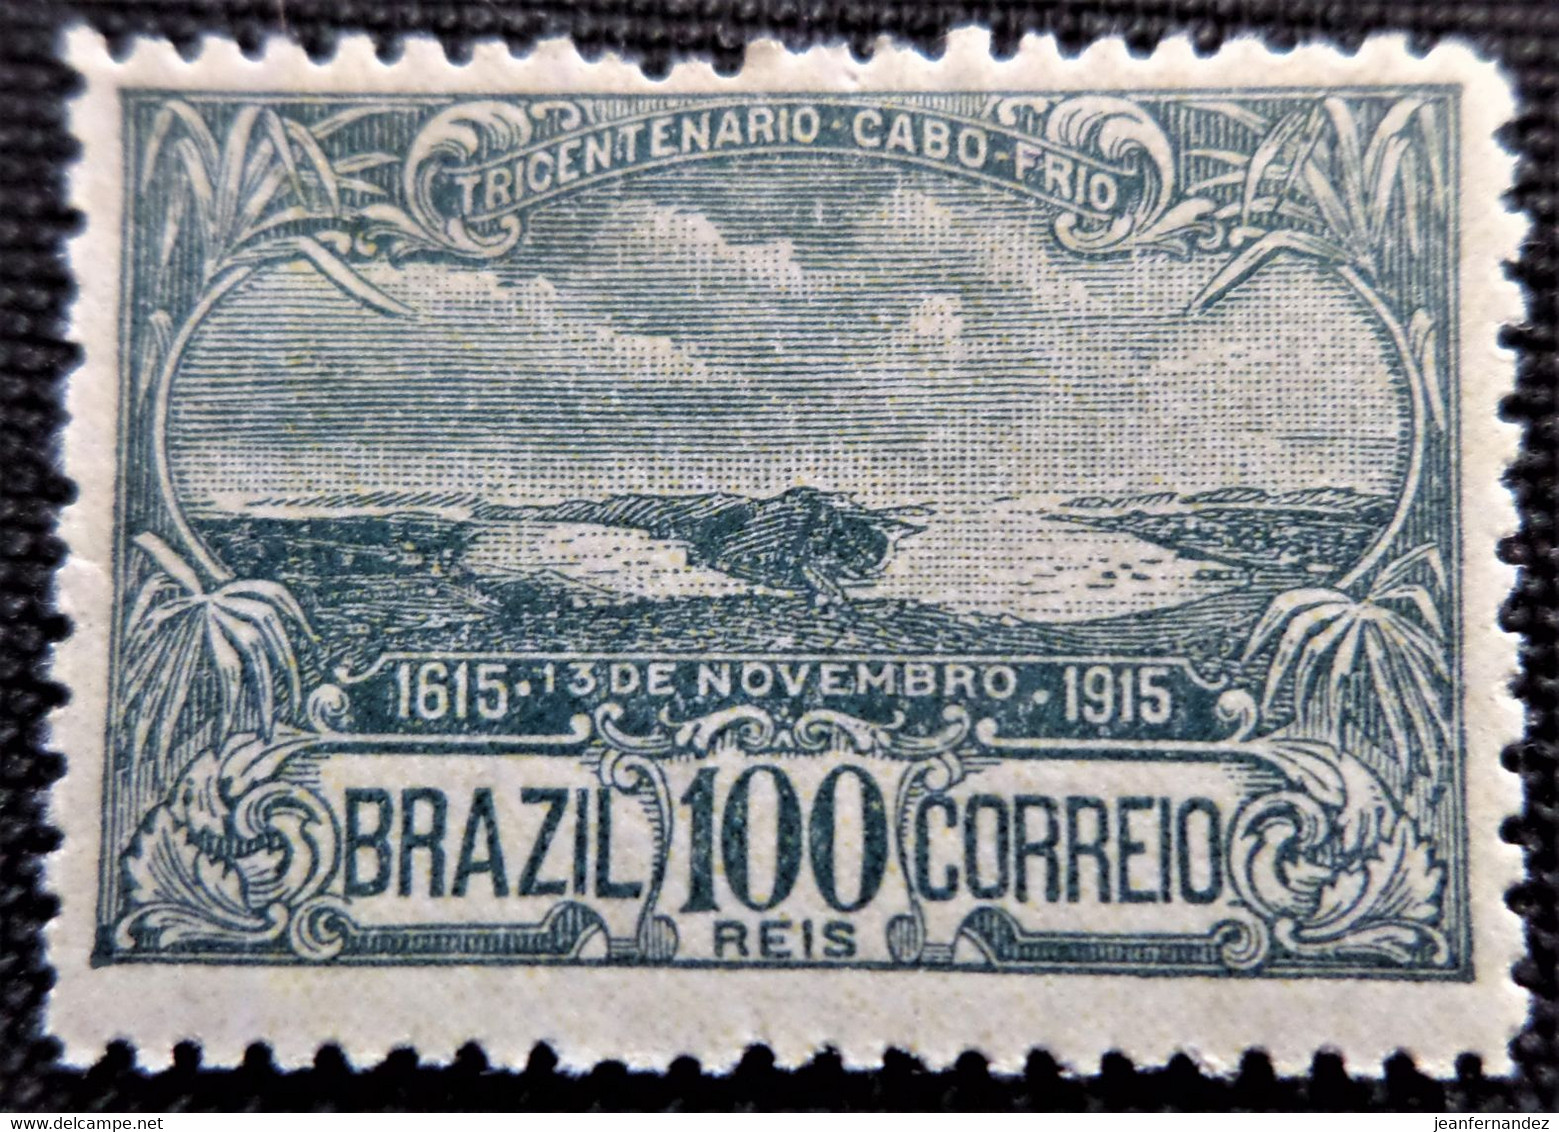 Timbre Du Brésil 1915  300th Anniversary Of The Founding Of Cabo Frio Stampworld N° 197 Neuf Avec Trace De Charnière - Neufs